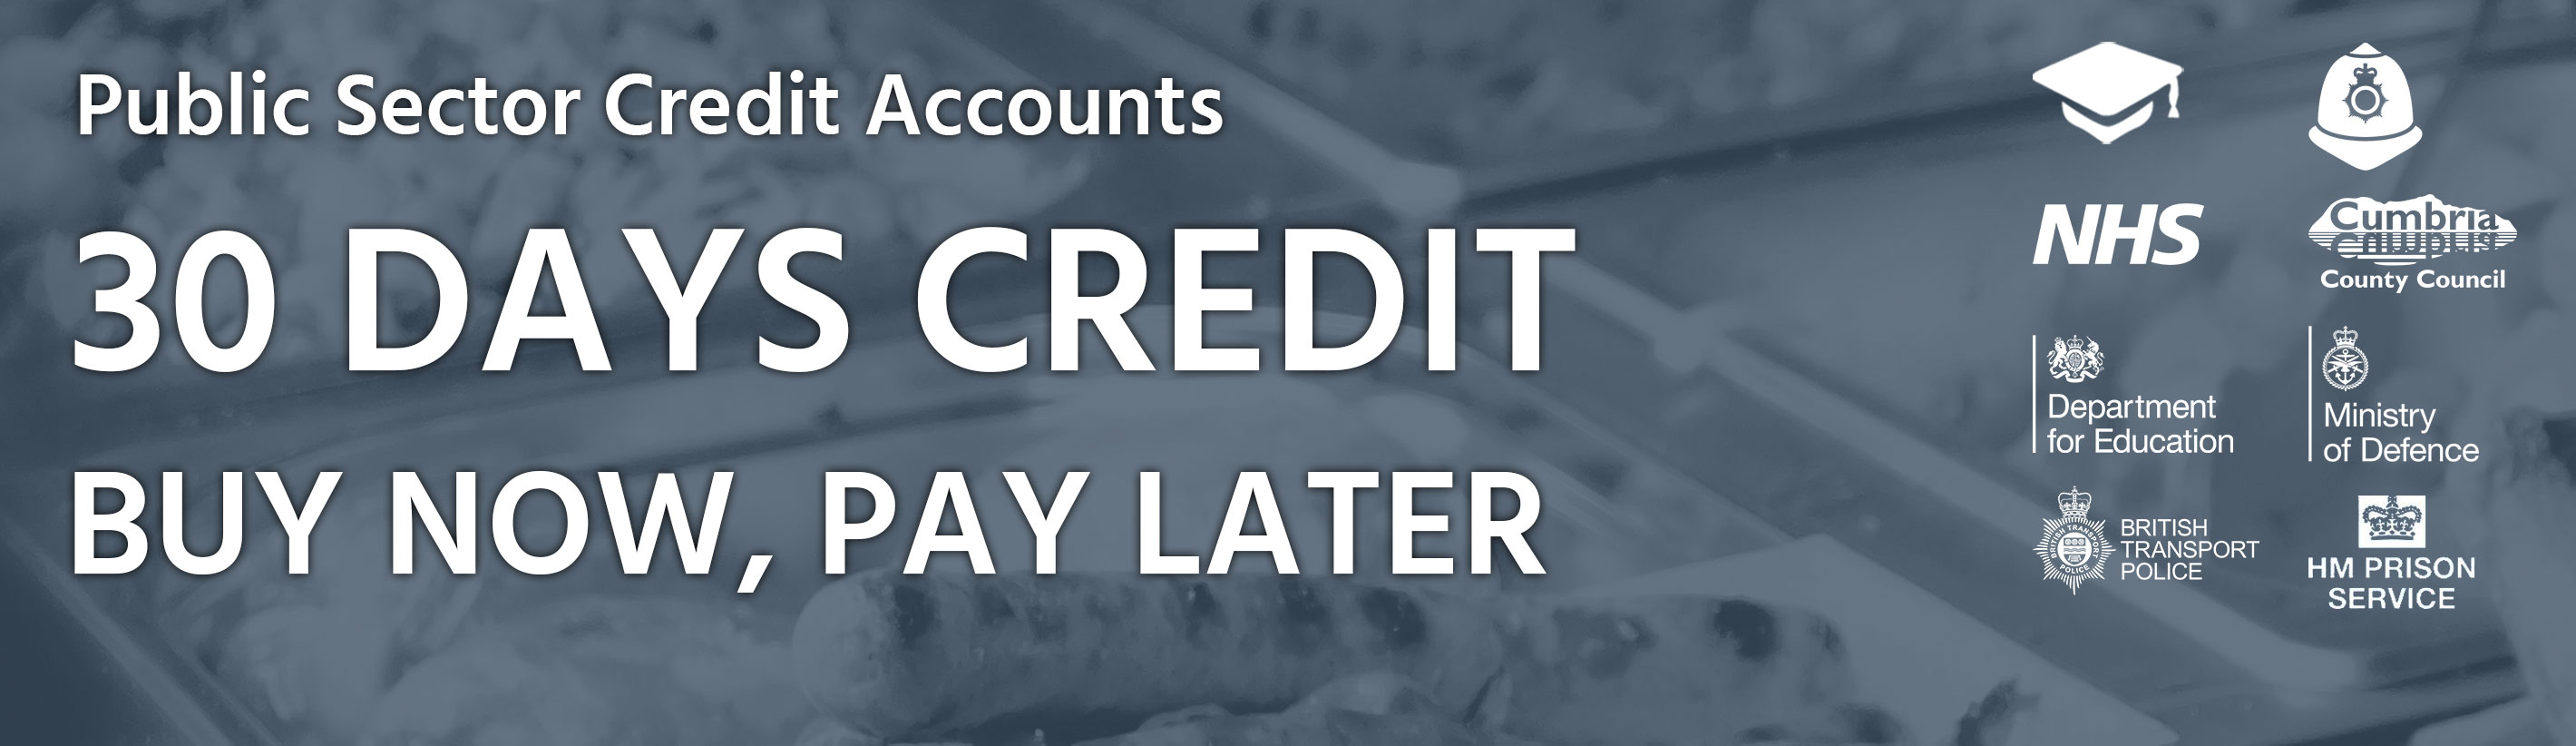 Public Sector Credit Accounts, 30 Days Credit, Buy Now, Pay Later